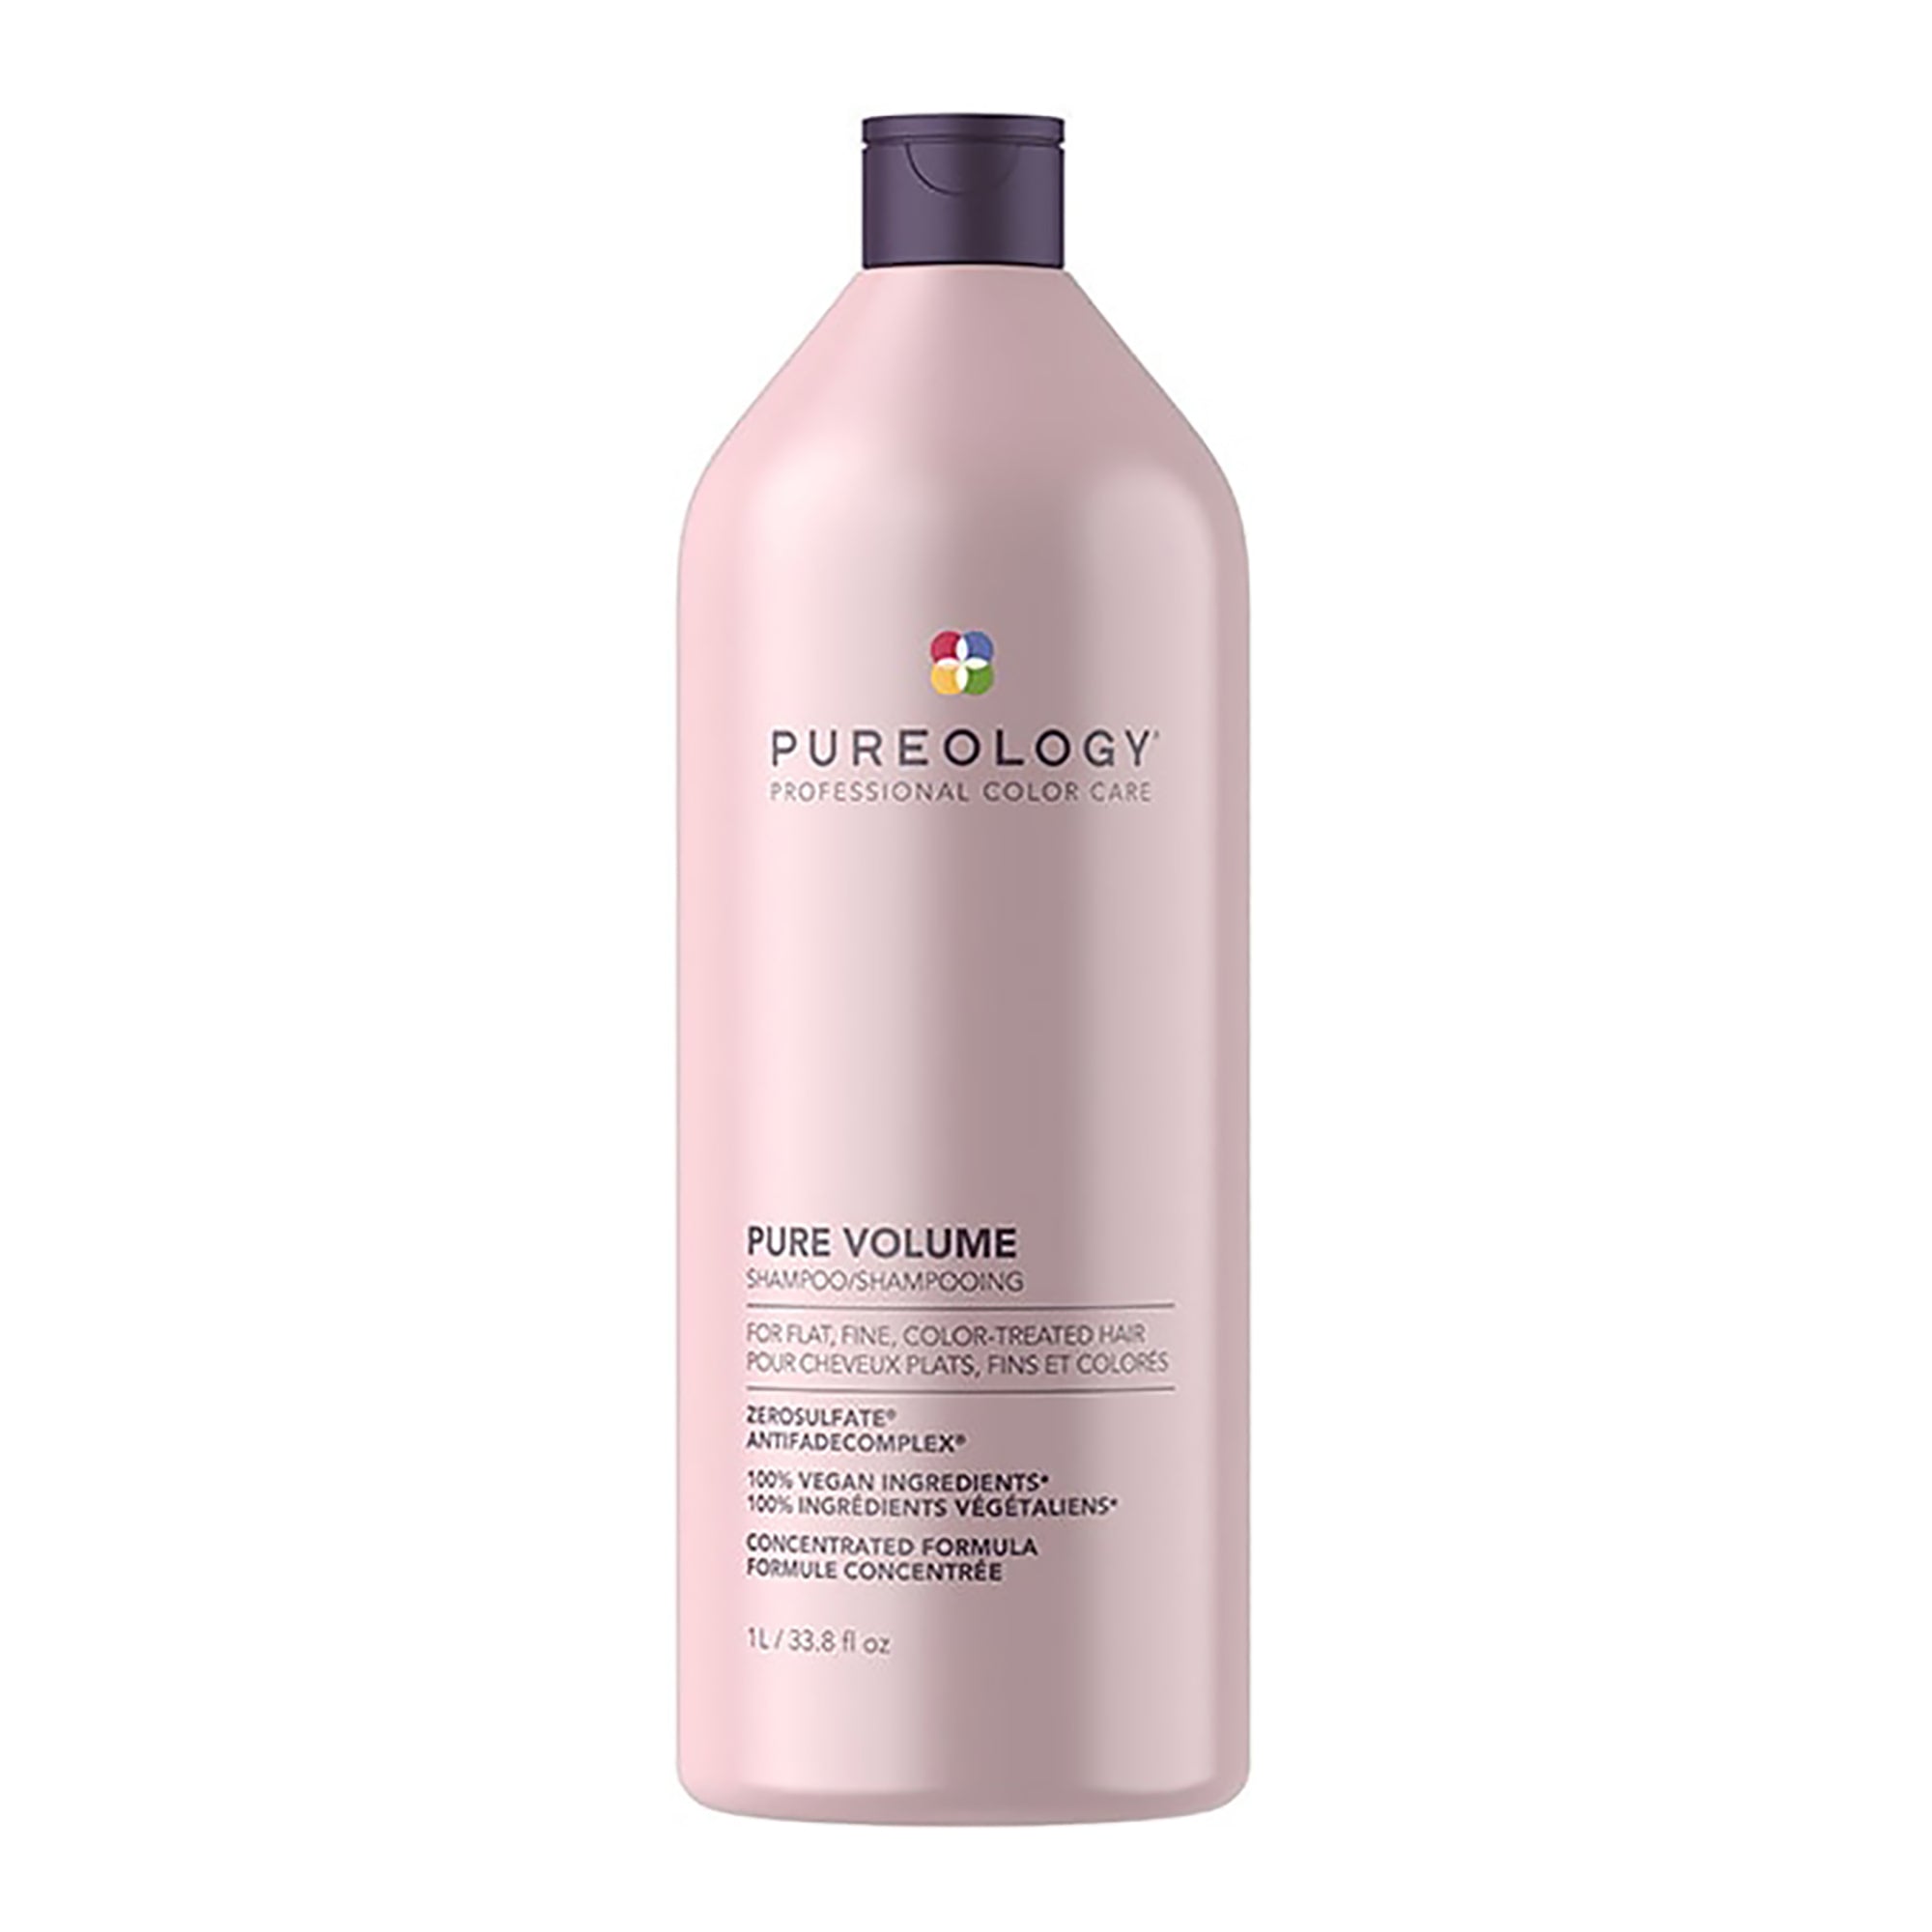 Mary Musling gaben Pureology Pure Volume Shampoo and Conditioner - Planet Beauty